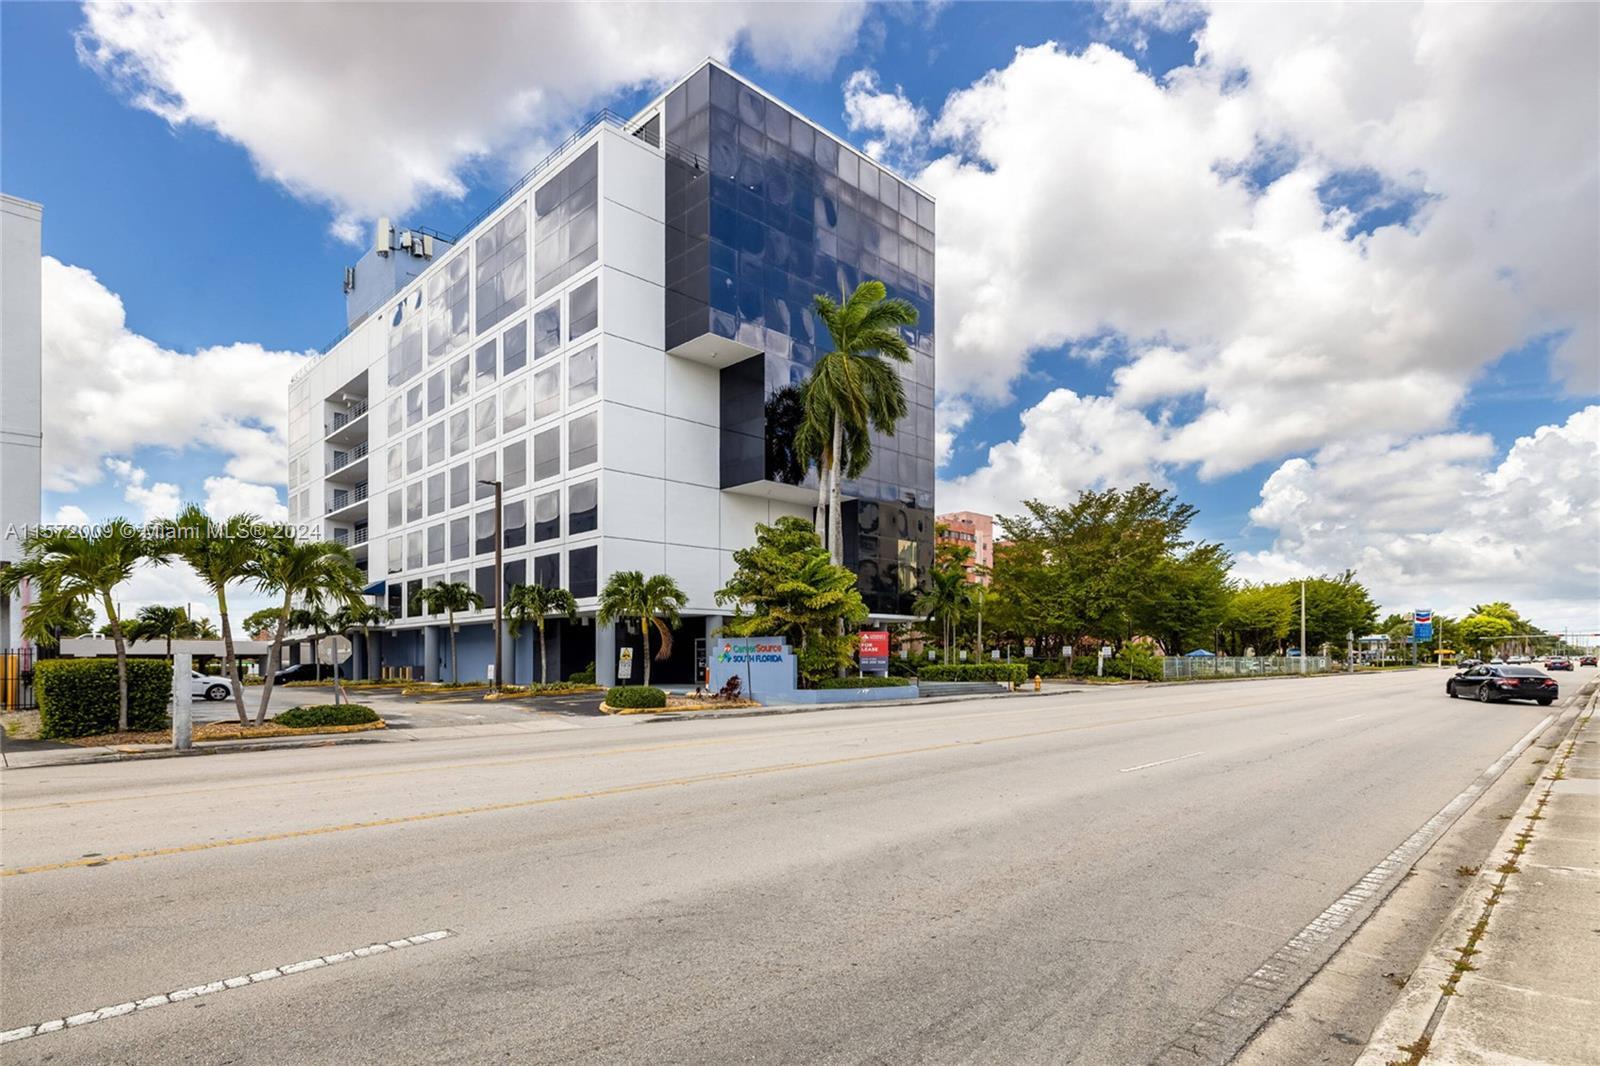 Photo of 5040 NW 7th St #Suite 300 in Miami, FL